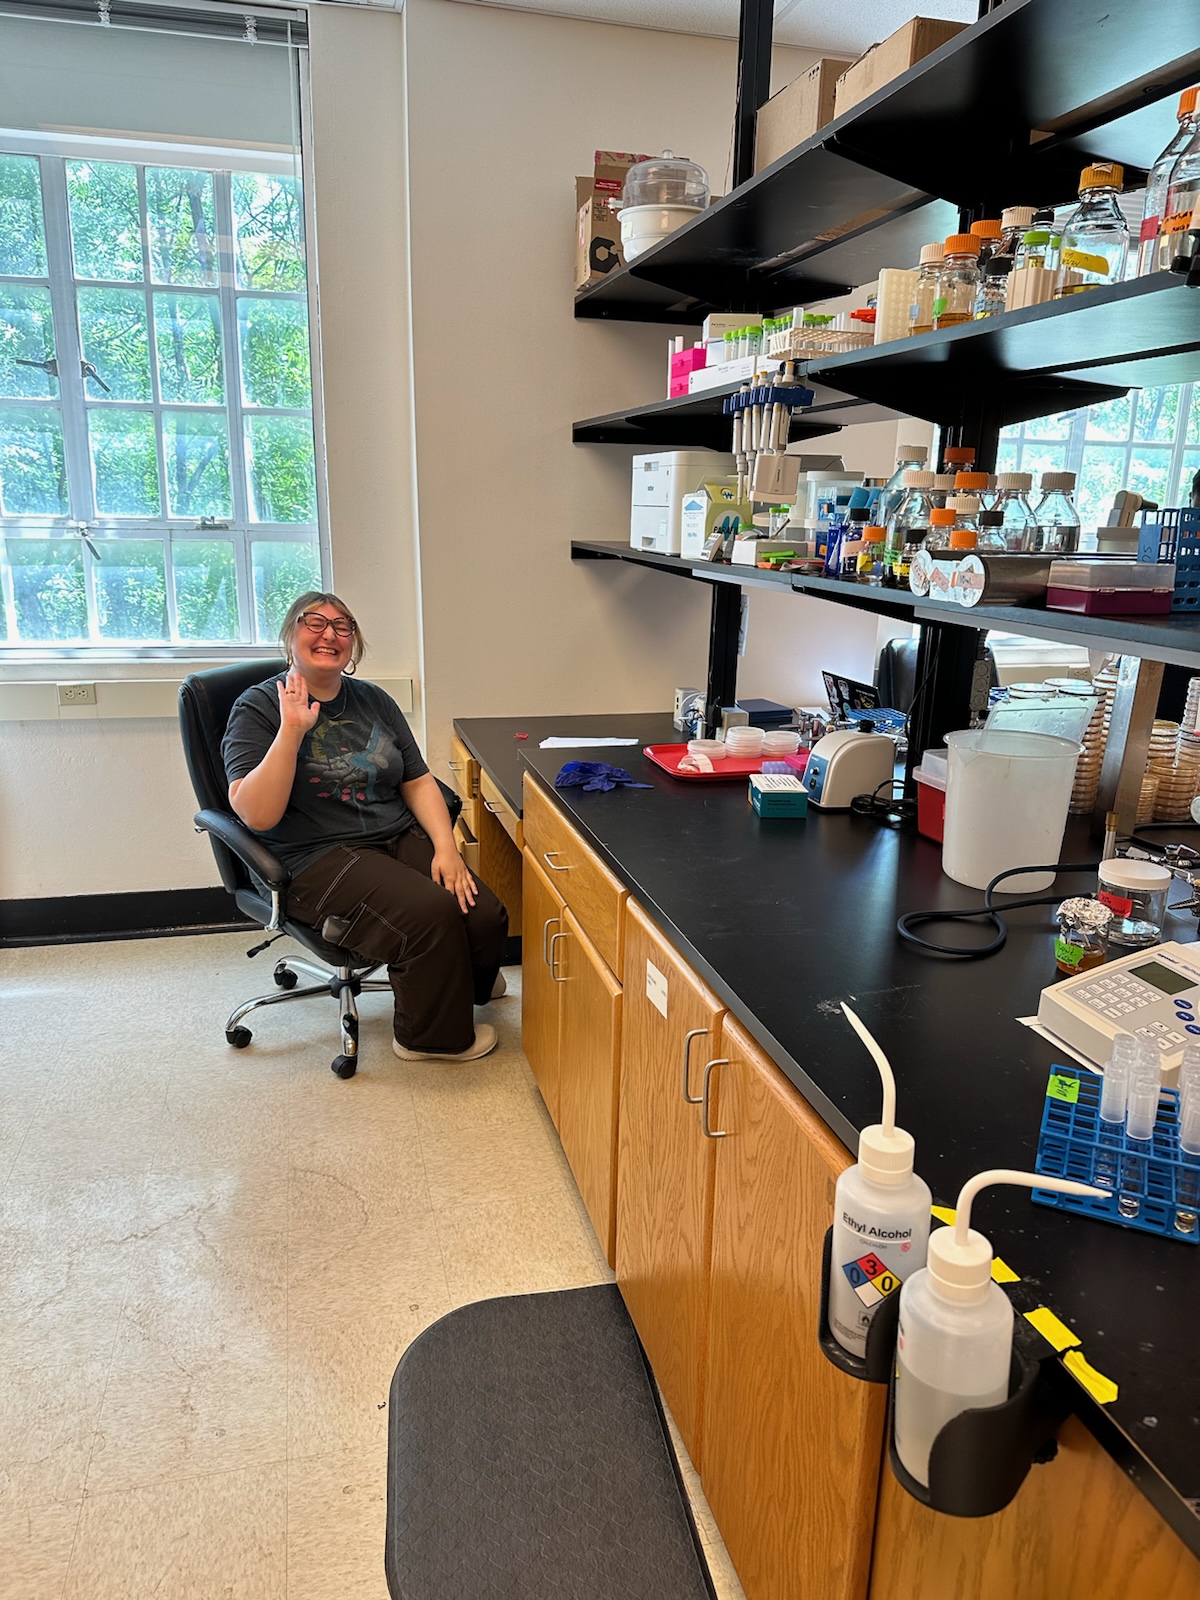 Photograph of Madeline sitting at her new bench in the lab.